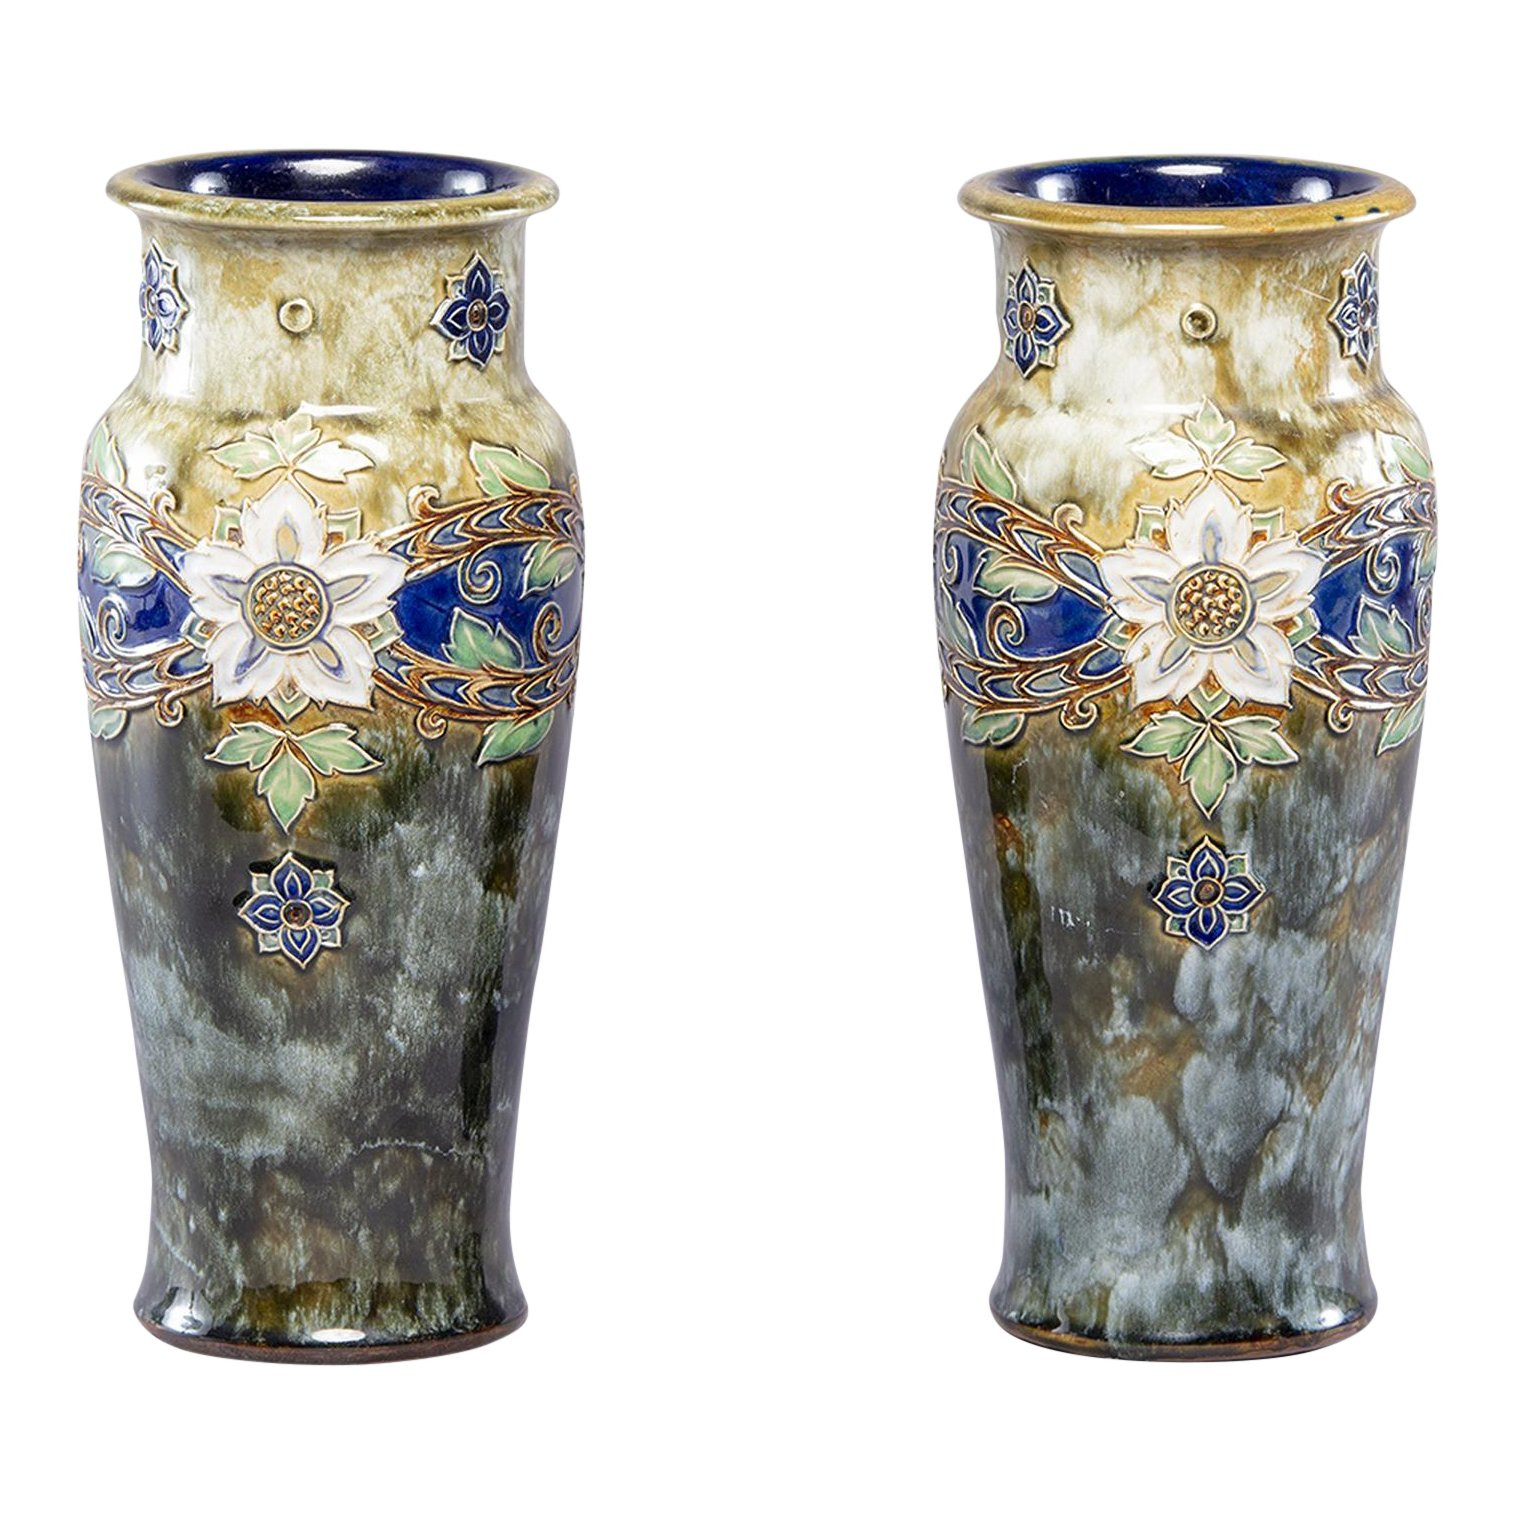 15 Amazing Royal Doulton Vases 1920 2024 free download royal doulton vases 1920 of distinguished pair tall royal doulton art nouveau lambeth vases by inside distinguished pair tall royal doulton art nouveau lambeth vases by winnie bowstead decas